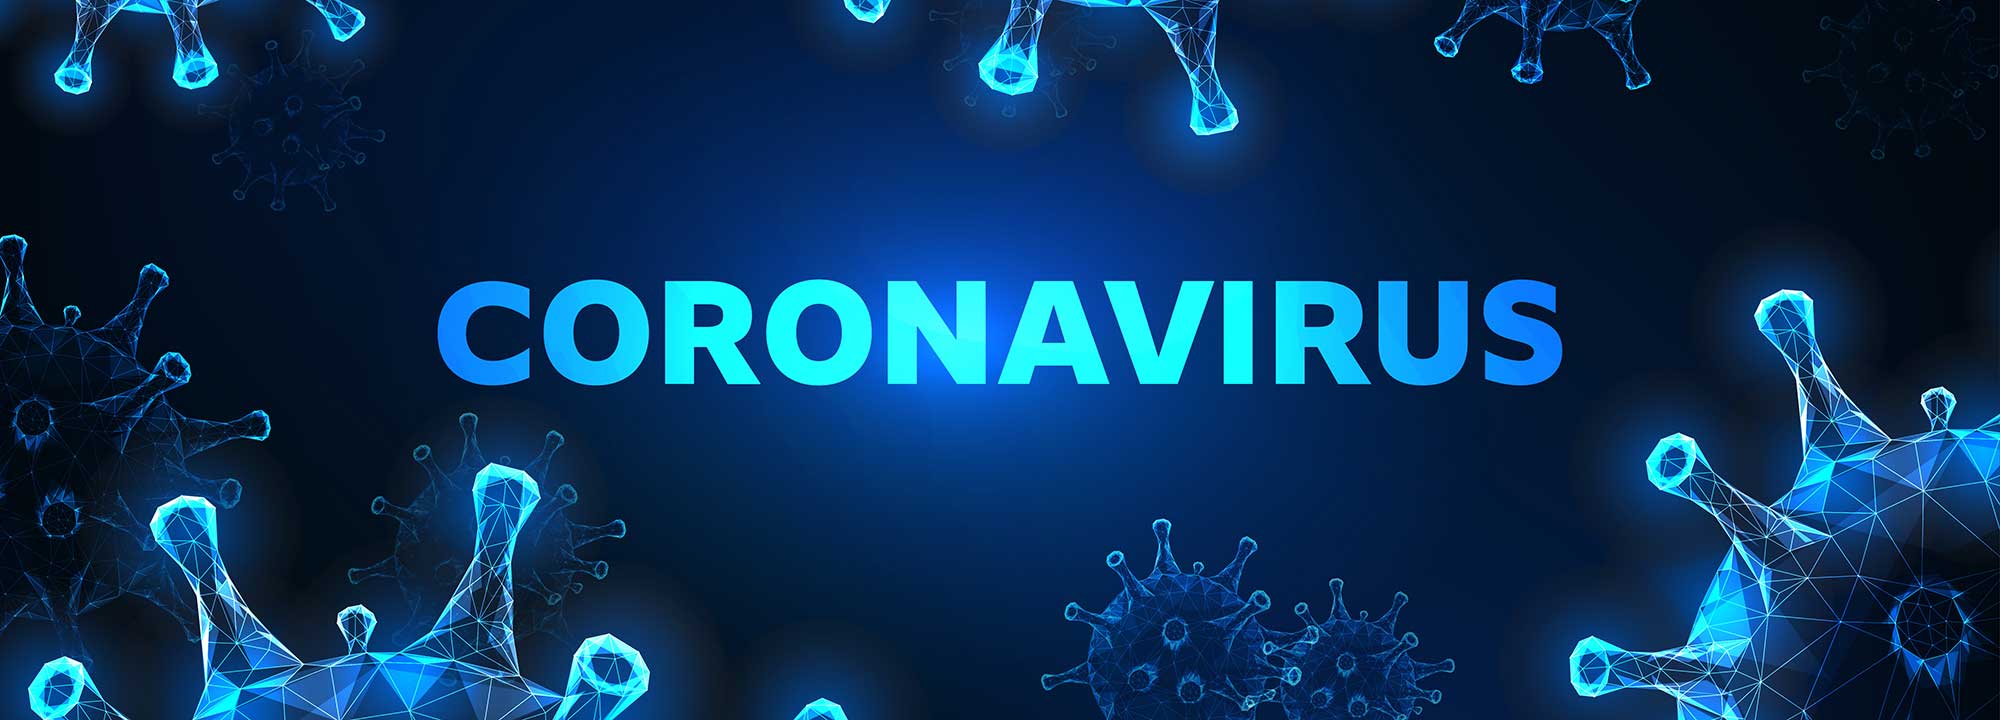 Futuristic coronavirus cells abstract background with glowing low polygonal virus cells and text on dark blue background. 